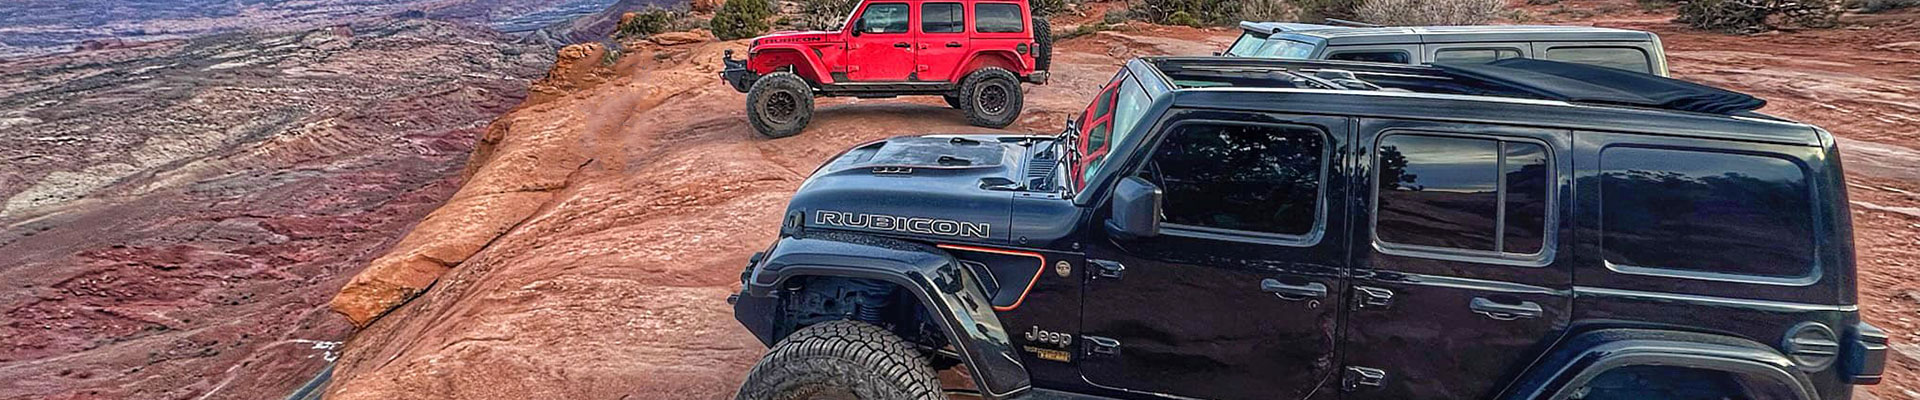 Fantasy RV Tours: 8 Day Moab Off-Roadin’ for Jeep Wrangler Owners (08UMOP-050124)